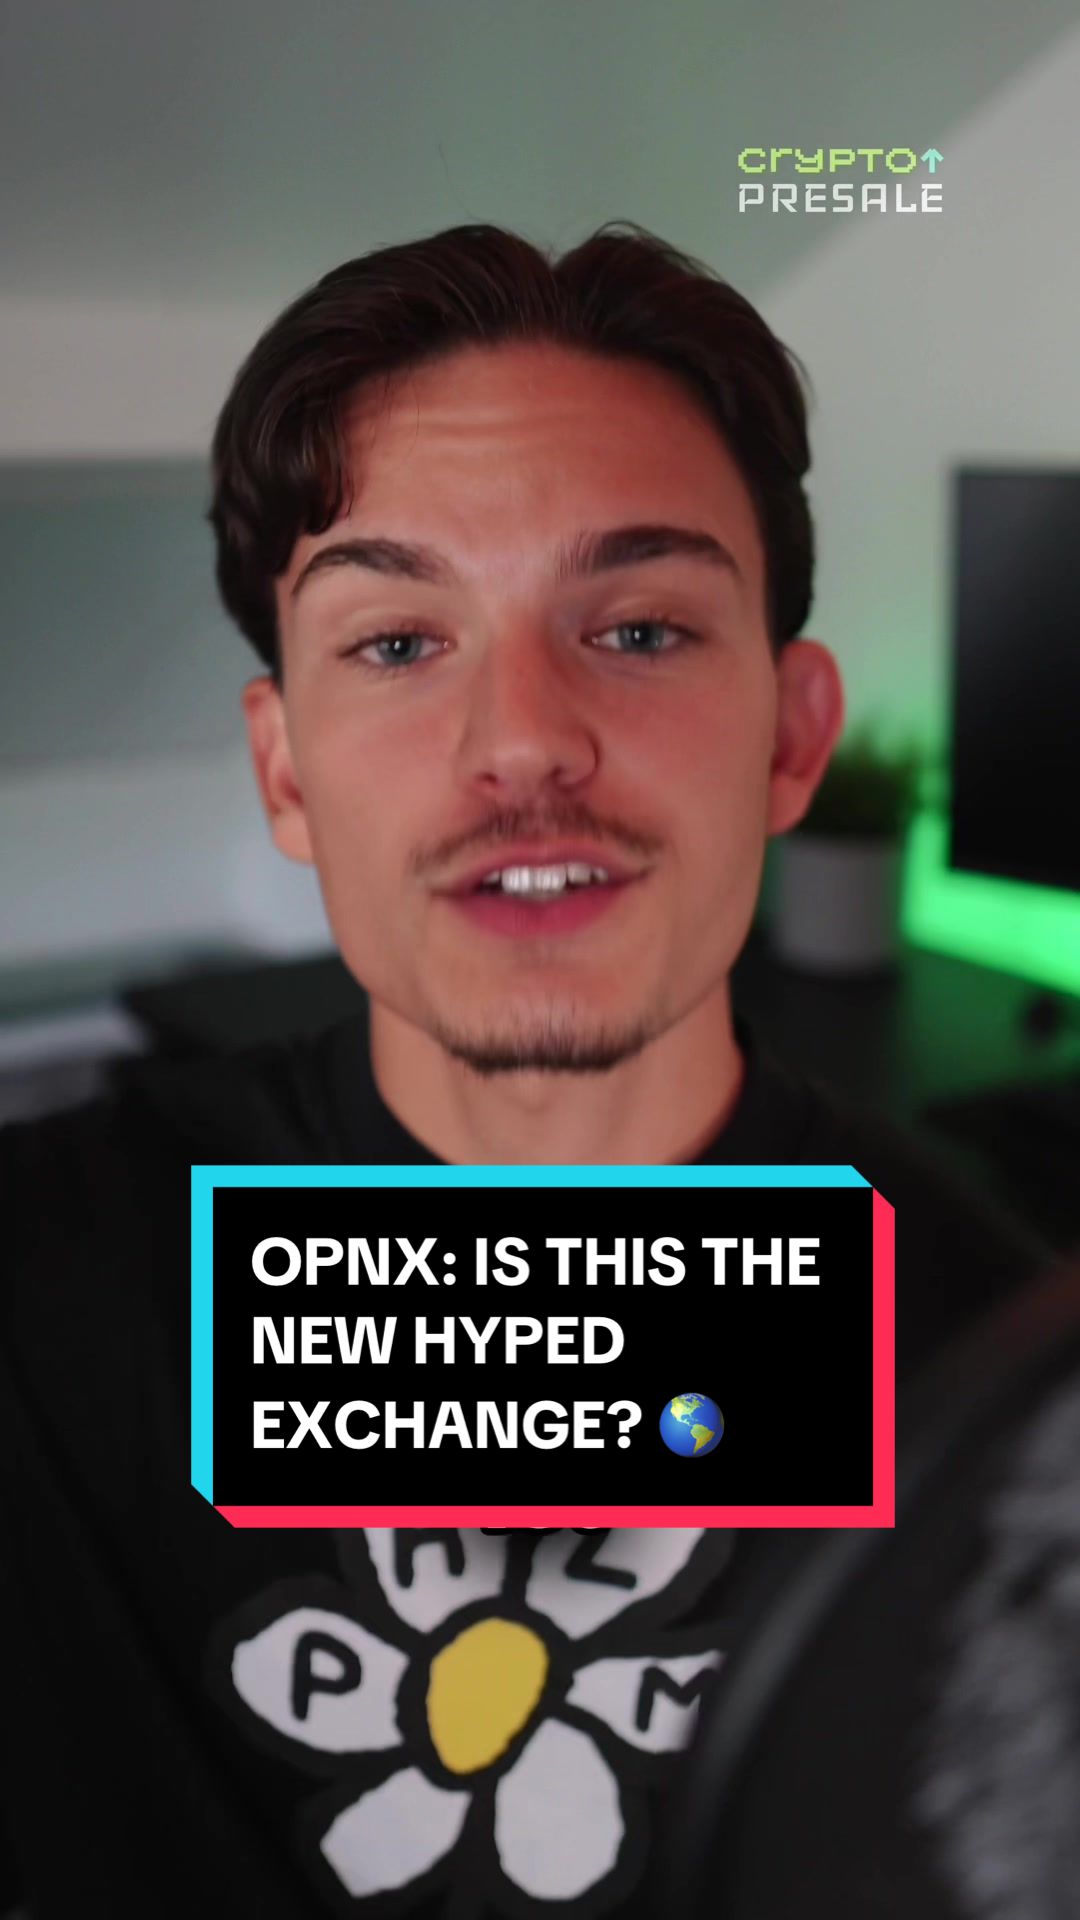 OPNX: What does this new exchange see for the future of crypto?  #crypto #cryptocurrency #finance #cryptopresale #cryptonews #opnx